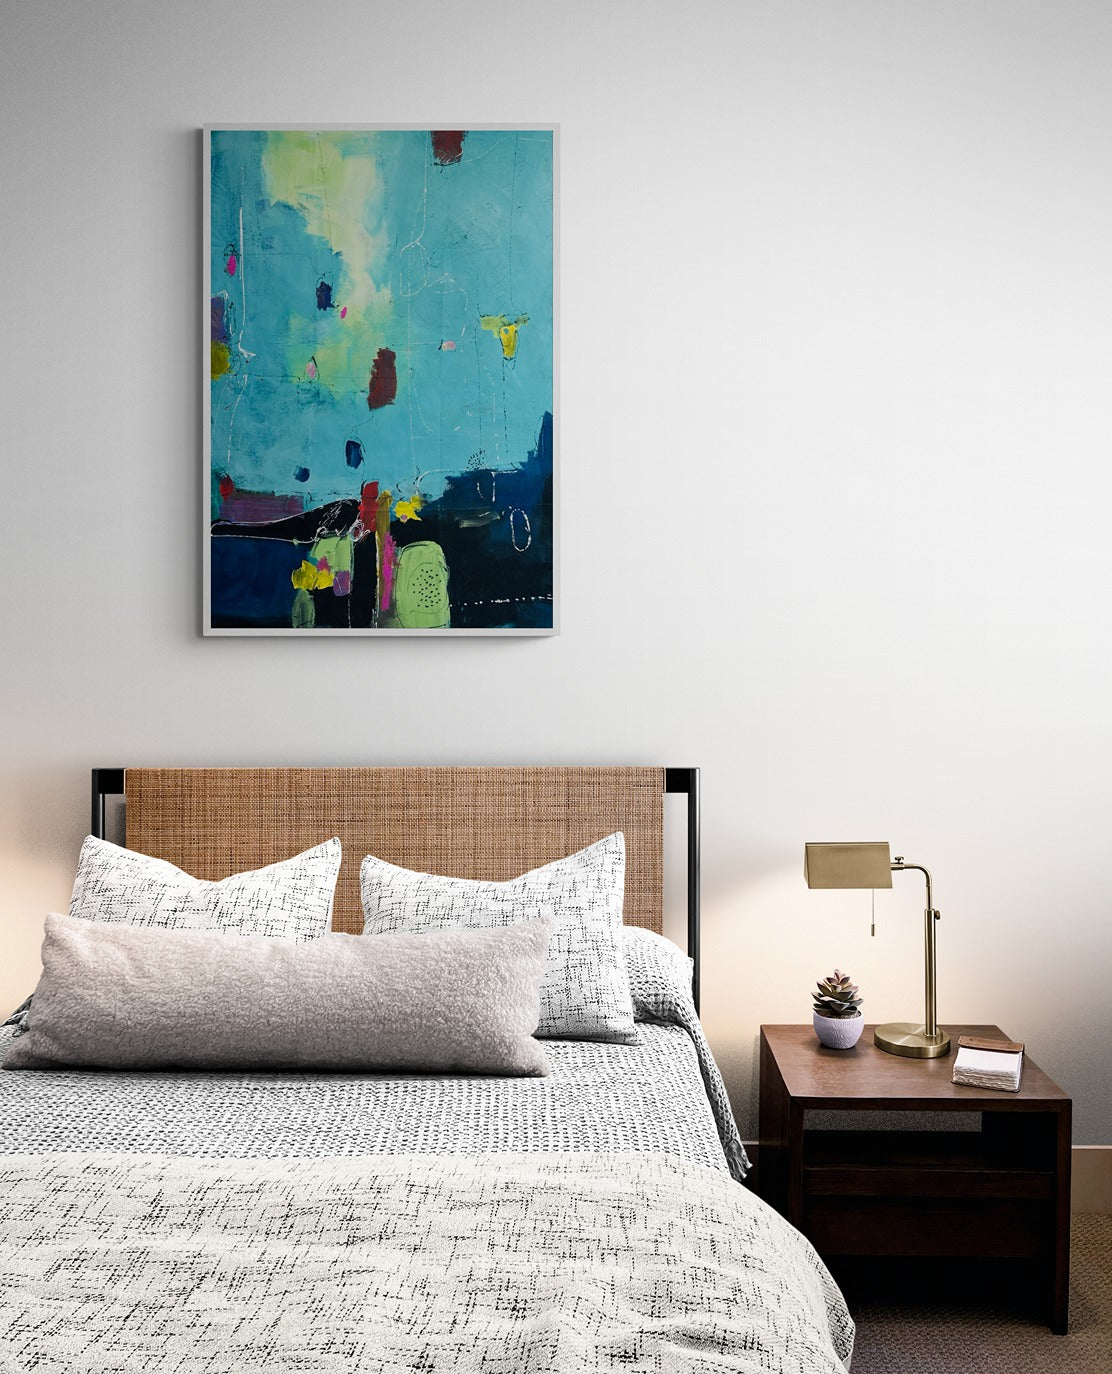 large_original_hand_painted_canvas_abstract_wallart_comfy-bedroom-with-bright-table-lamp